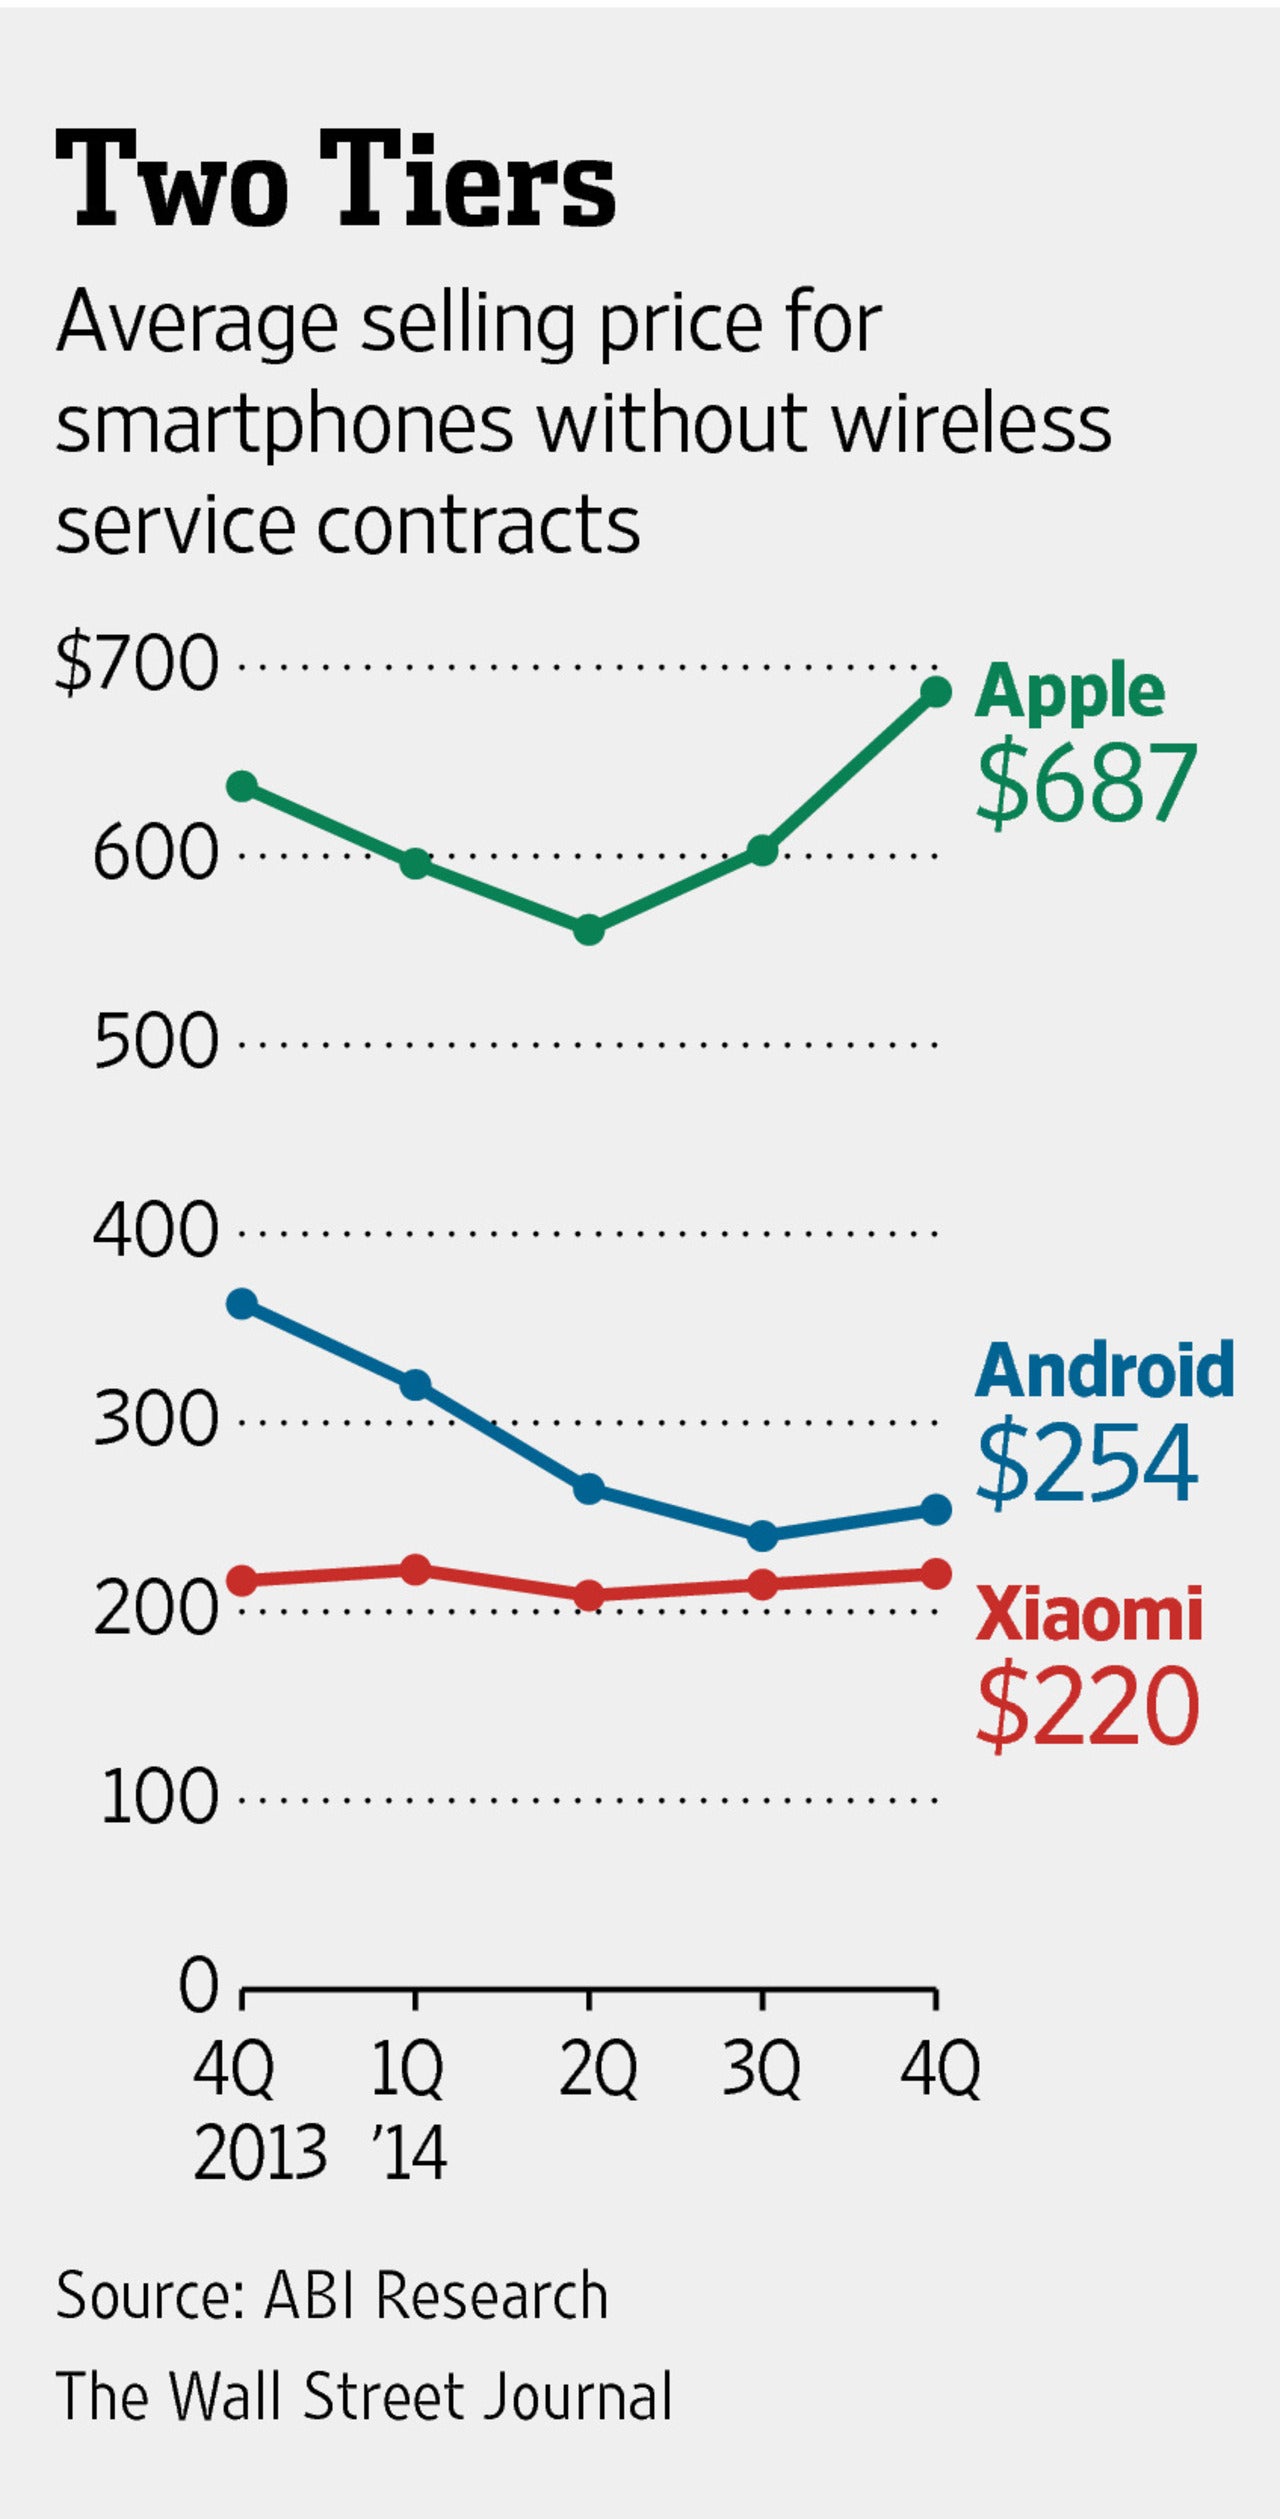 Apple widens the ASP gap: $687 for an iPhone, $254 for an Android